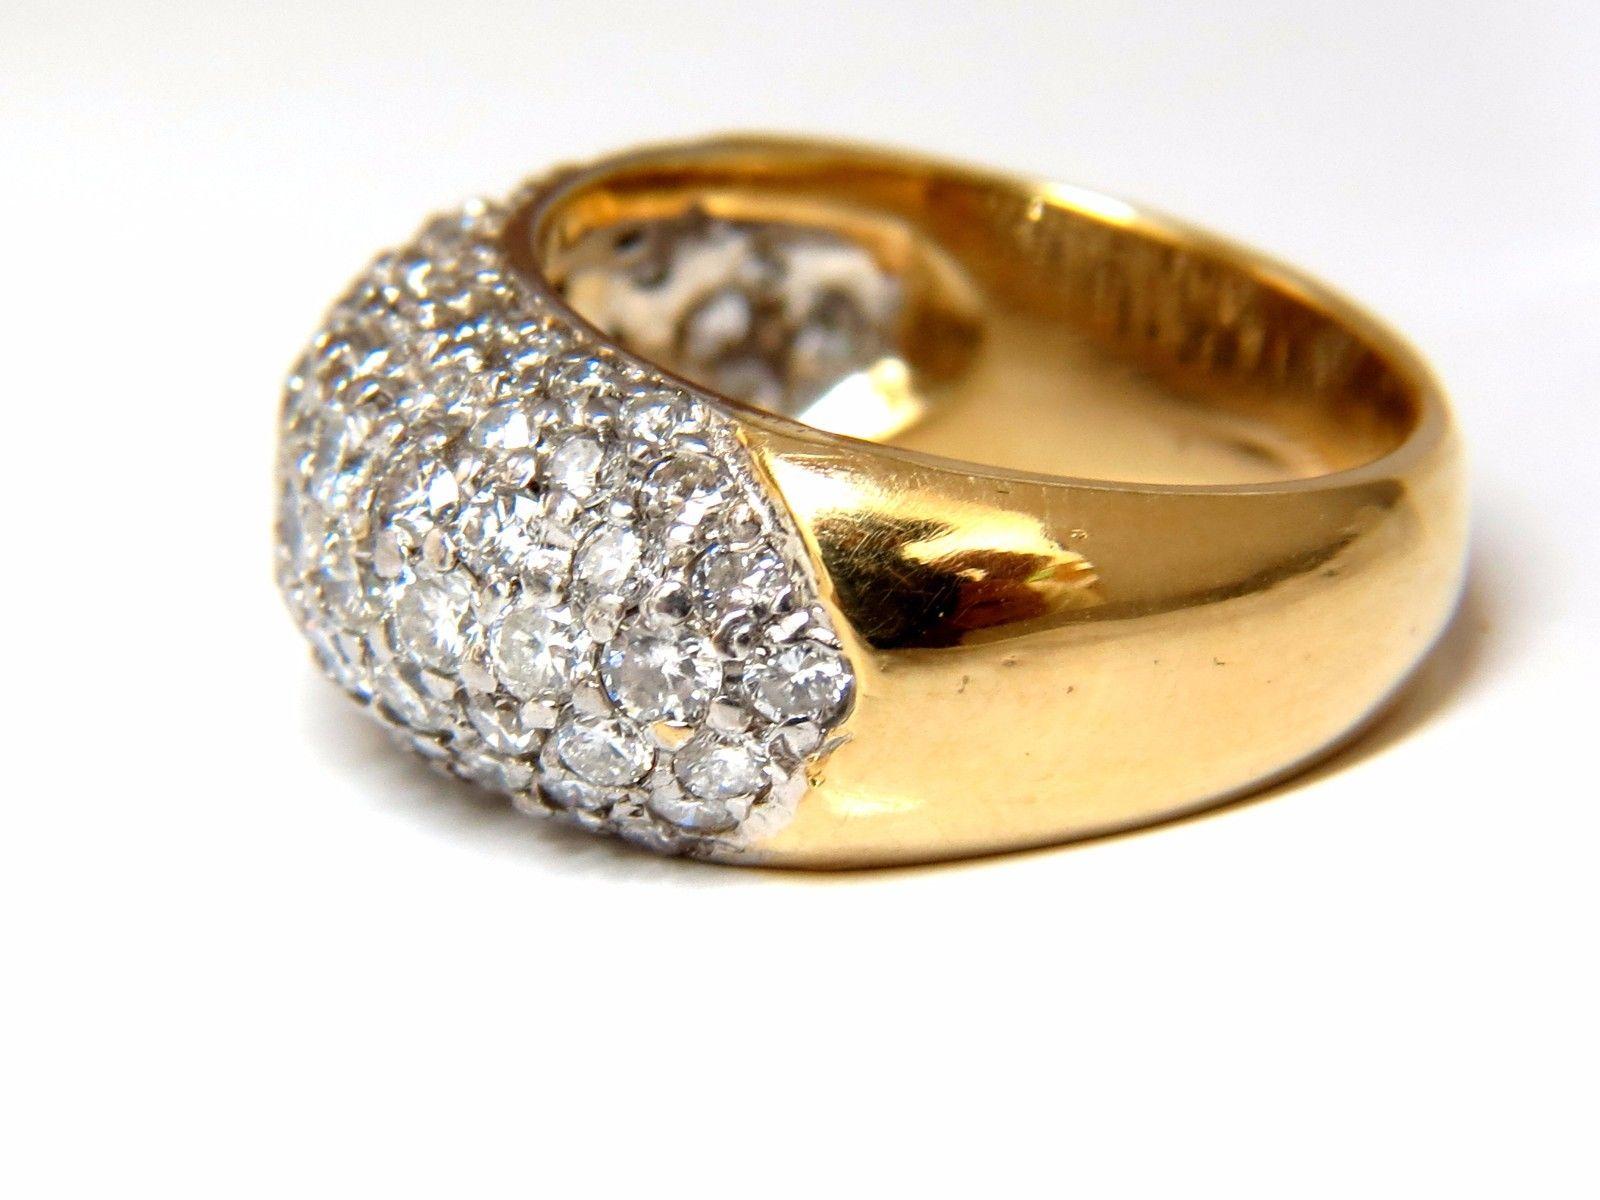 Domed Bead set classic.

1.50ct. Natural round diamonds ring

Diamonds: G-color, VS-2 clarity

Brilliant cuts & sparkles throughout


14kt. yellow gold. 
6 grams

$5000 Appraisal to accompany 

Current size: 5.25 and can be resized 

Ring is 9 mm